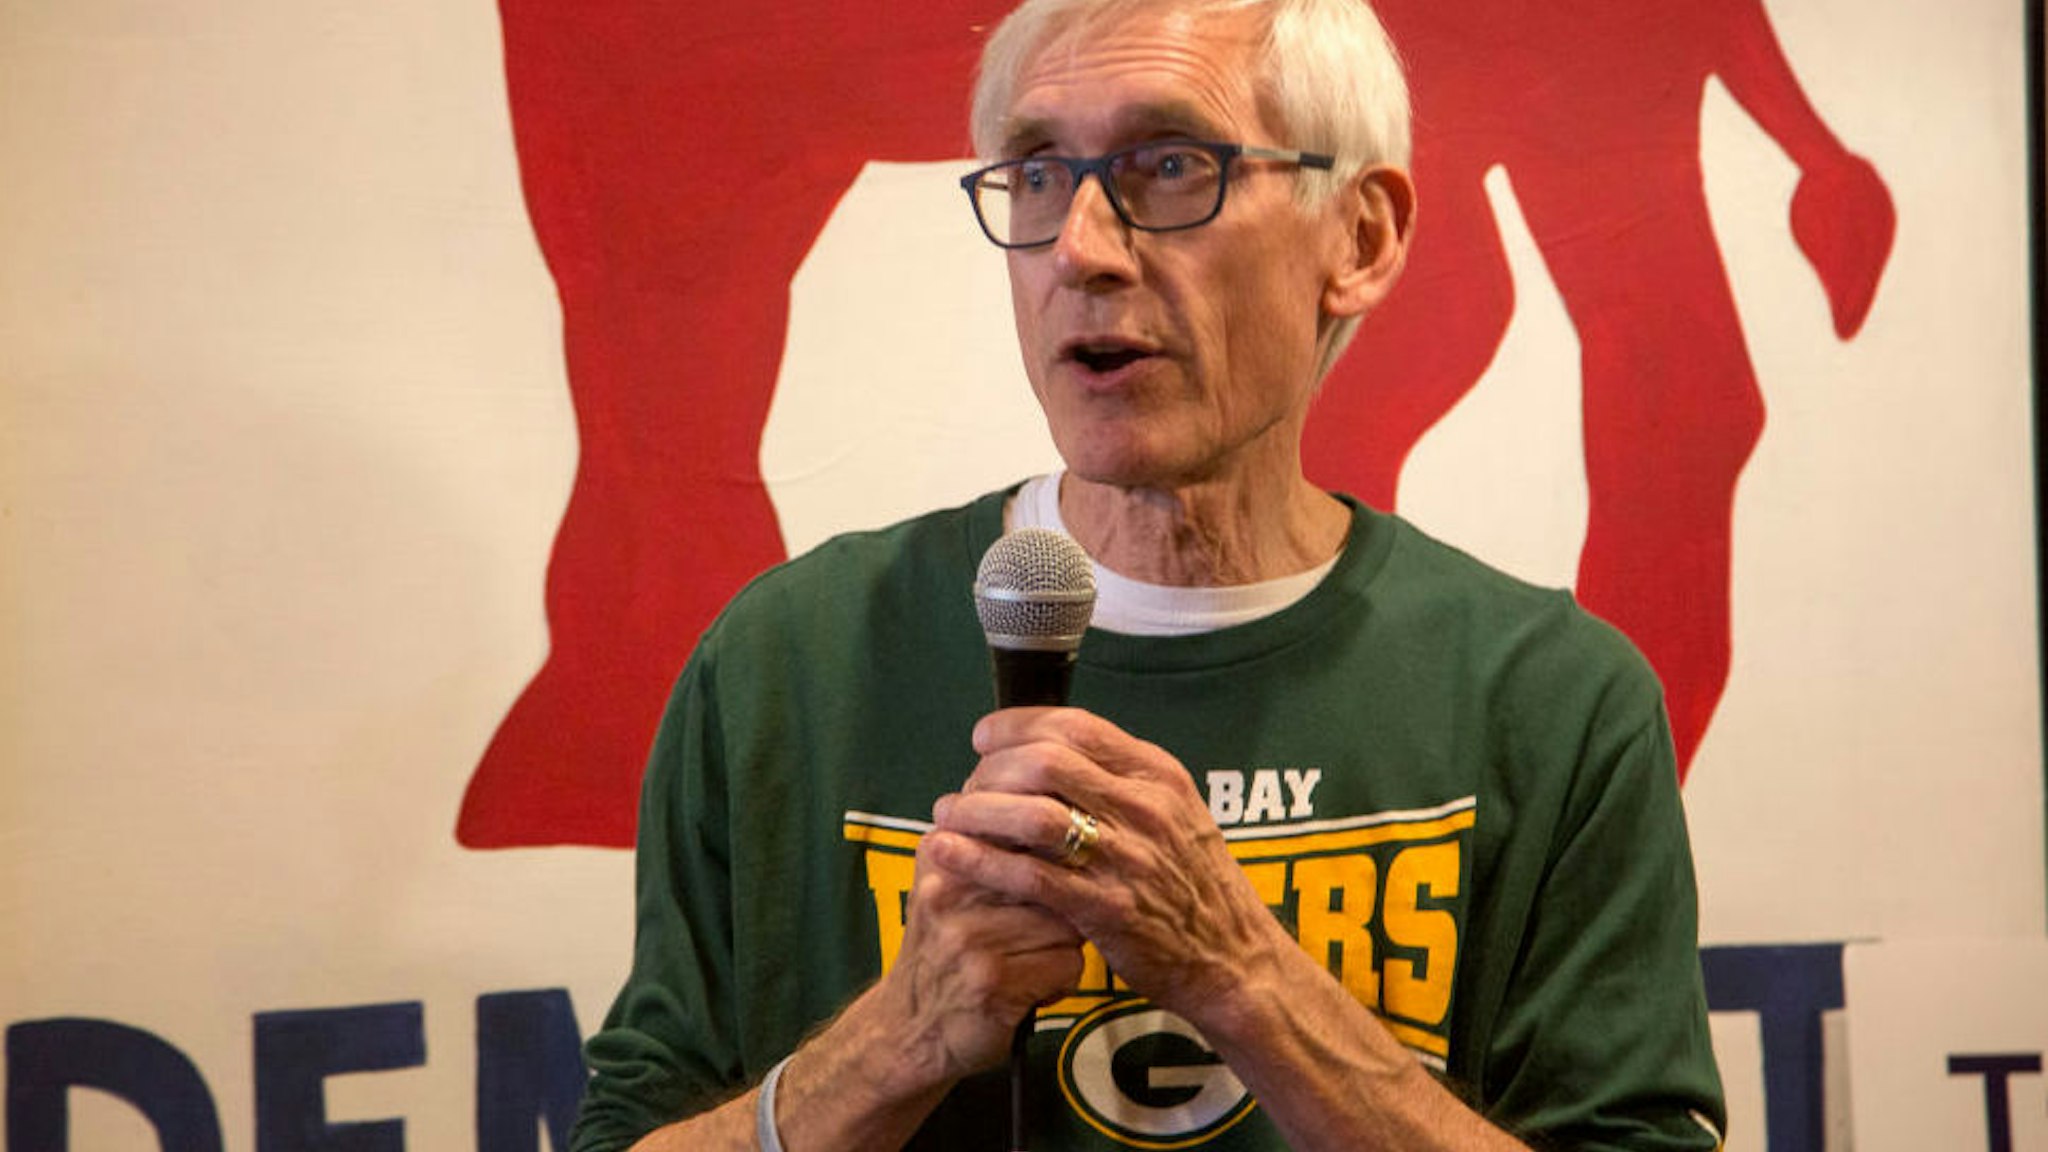 Democratic candidate for Wisconsin Governor, Tony Evers speaks to supporters at the Racine County Democratic office on November 4, 2018 in Racine, Wisconsin.